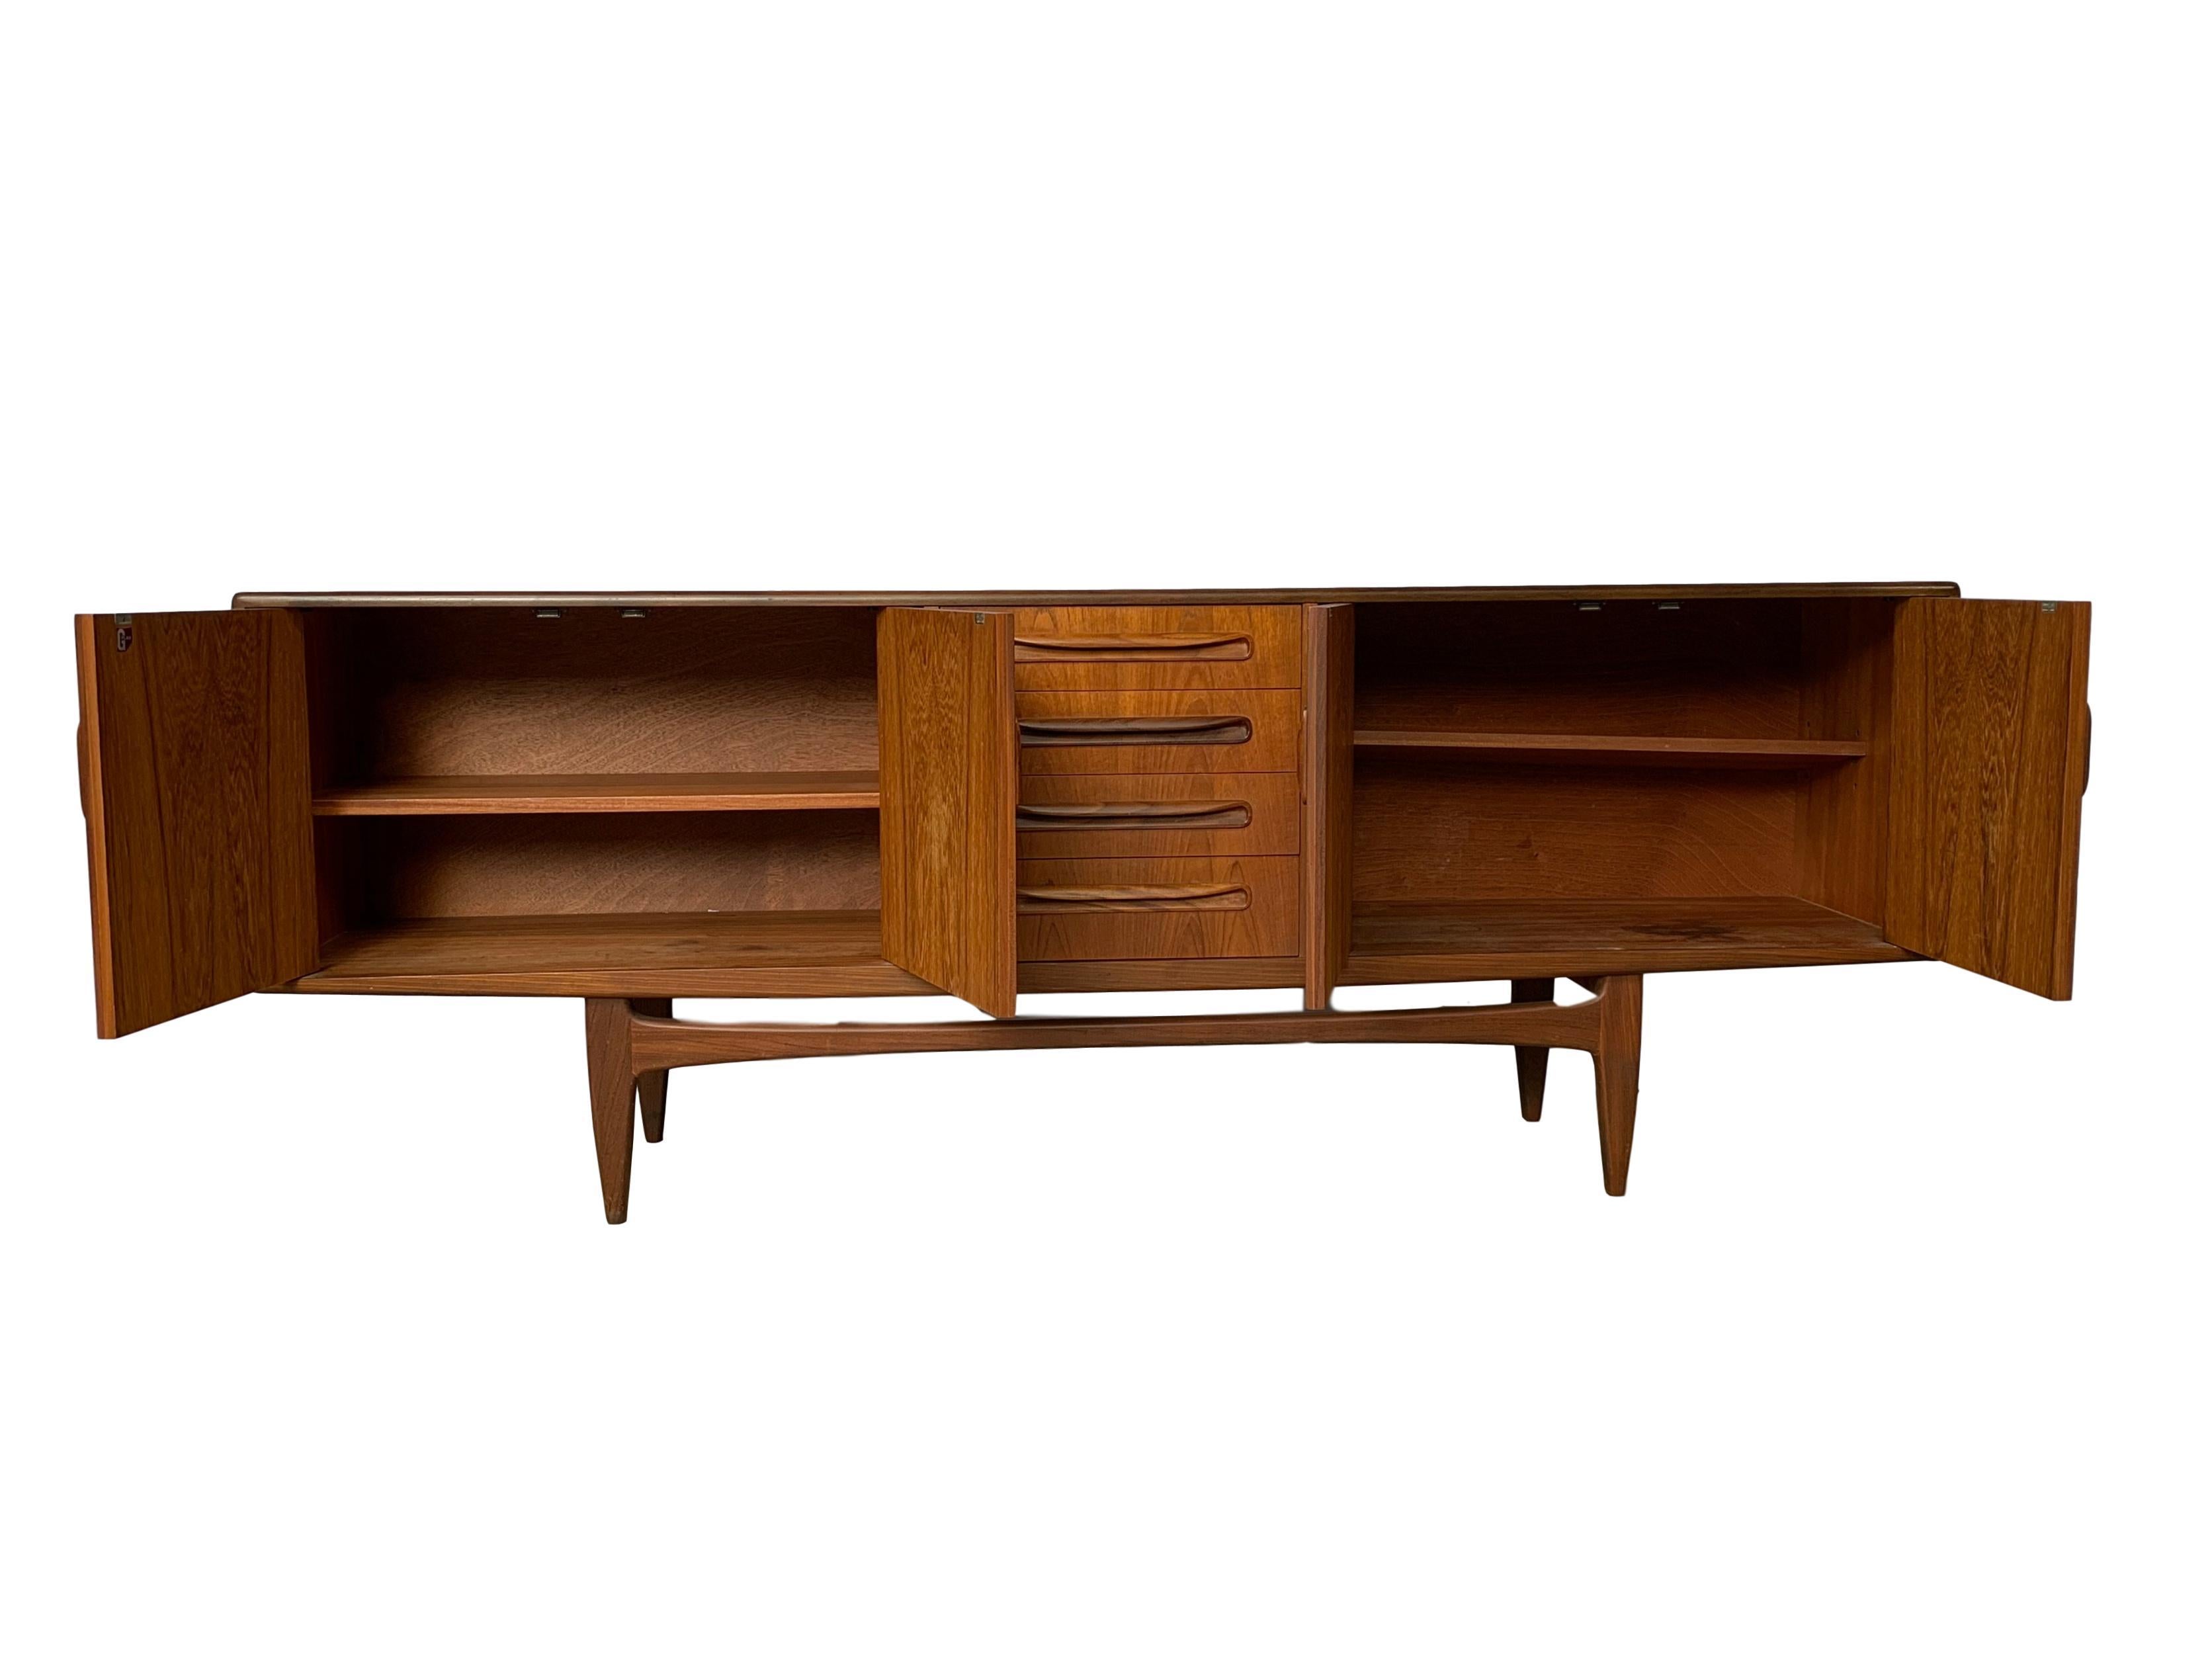 Mid-Century Modern credenza sideboard by G-Plan, circa 1967 in solid teak and afromasia teak on ‘Floating Base,’ with extensively fitted interior. Built to the highest standards, the piece exudes quality, beauty and style. Highly sought after